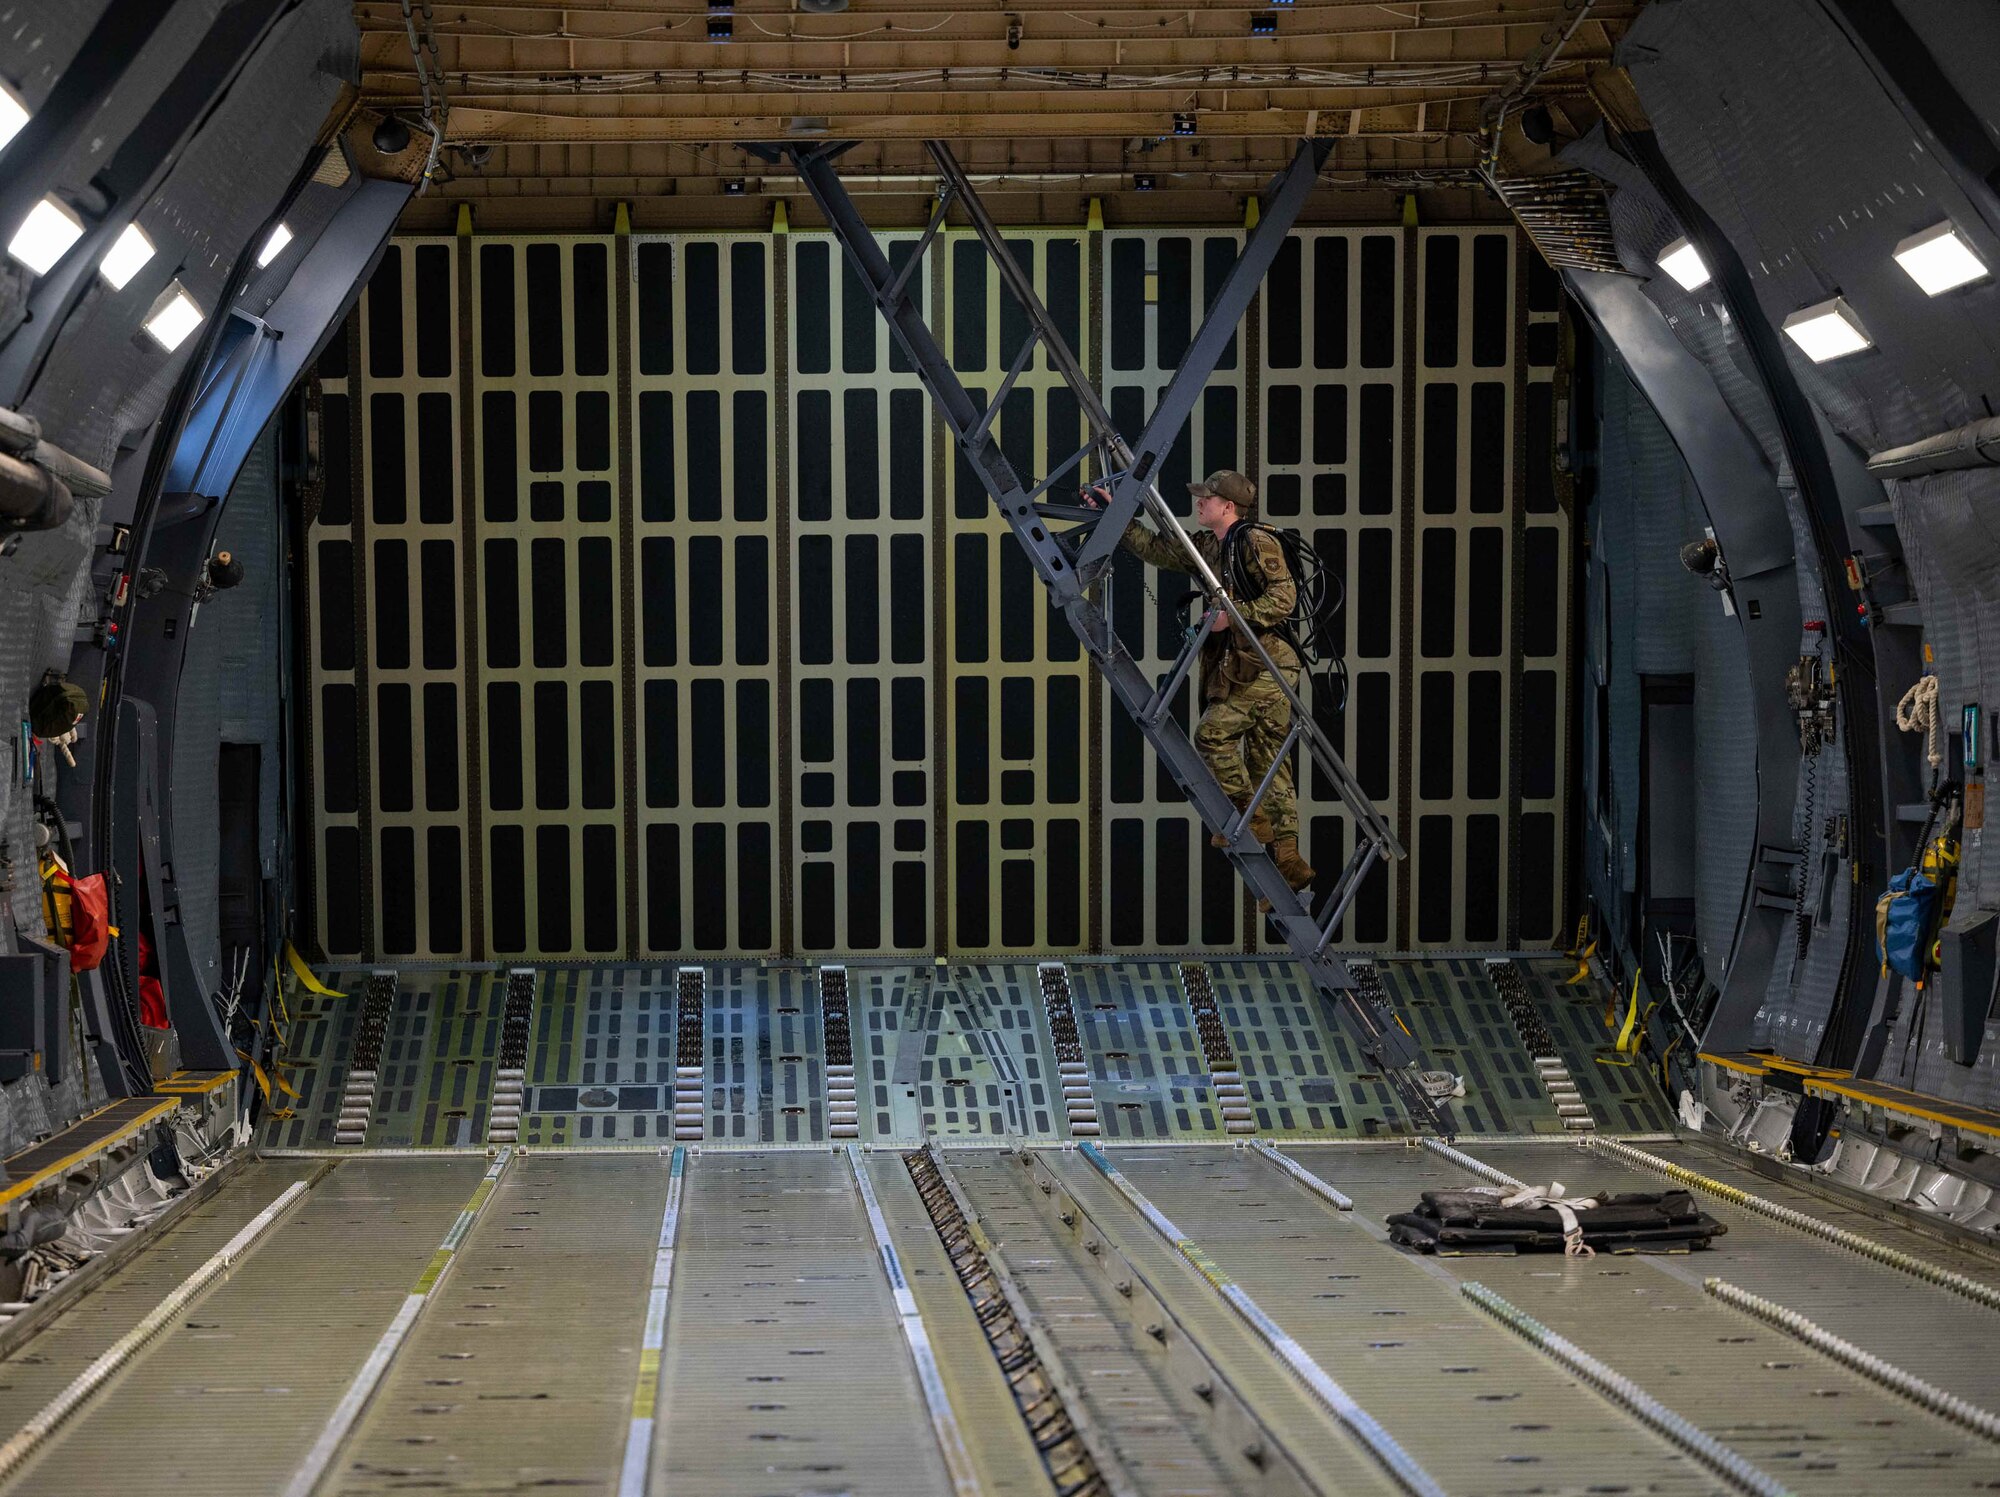 Airman 1st Class Liam Neven, 436th Aircraft Maintenance Squadron crew chief, climbs stairs towards the troop compartment on a C-5M Super Galaxy before takeoff to Joint Base McGuire-Dix-Lakehurst, New Jersey, at Dover Air Force Base, Delaware, Dec. 17, 2021. The 9th Airlift Squadron delivered supplies to aid the Joint Base Pearl Harbor-Hickam (JBPHH), Hawaii water quality recovery, a joint U.S. military initiative working closely with the State of Hawaii, Department of Health, Honolulu Board of Water Supply, U.S. government and independent organizations to restore a safe water delivery system to JBPHH military housing communities through testing, treatment, and repair. For detailed information, including available resources and locations, and news, go to www.navy.mil/jointbasewater.      (U.S. Air Force photo by Senior Airman Faith Schaefer)